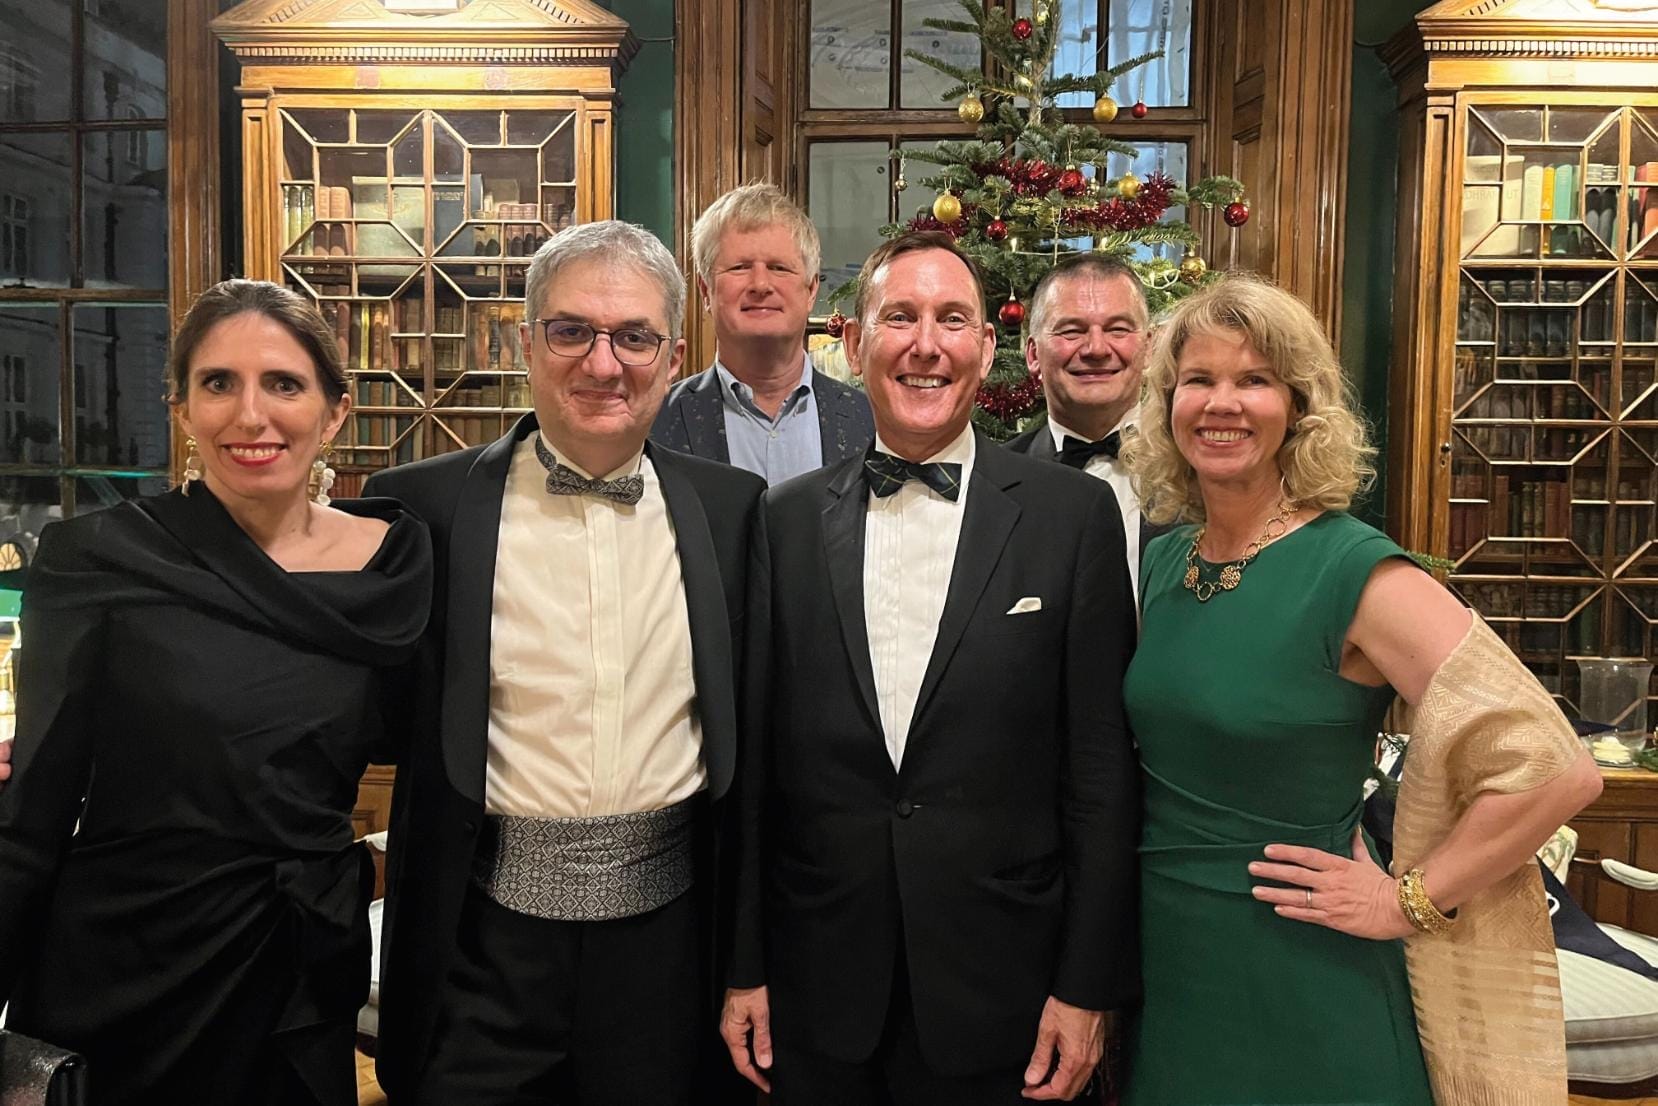 Six people in formal attire stand in front of two ornate bookcases and a Christmas tree.